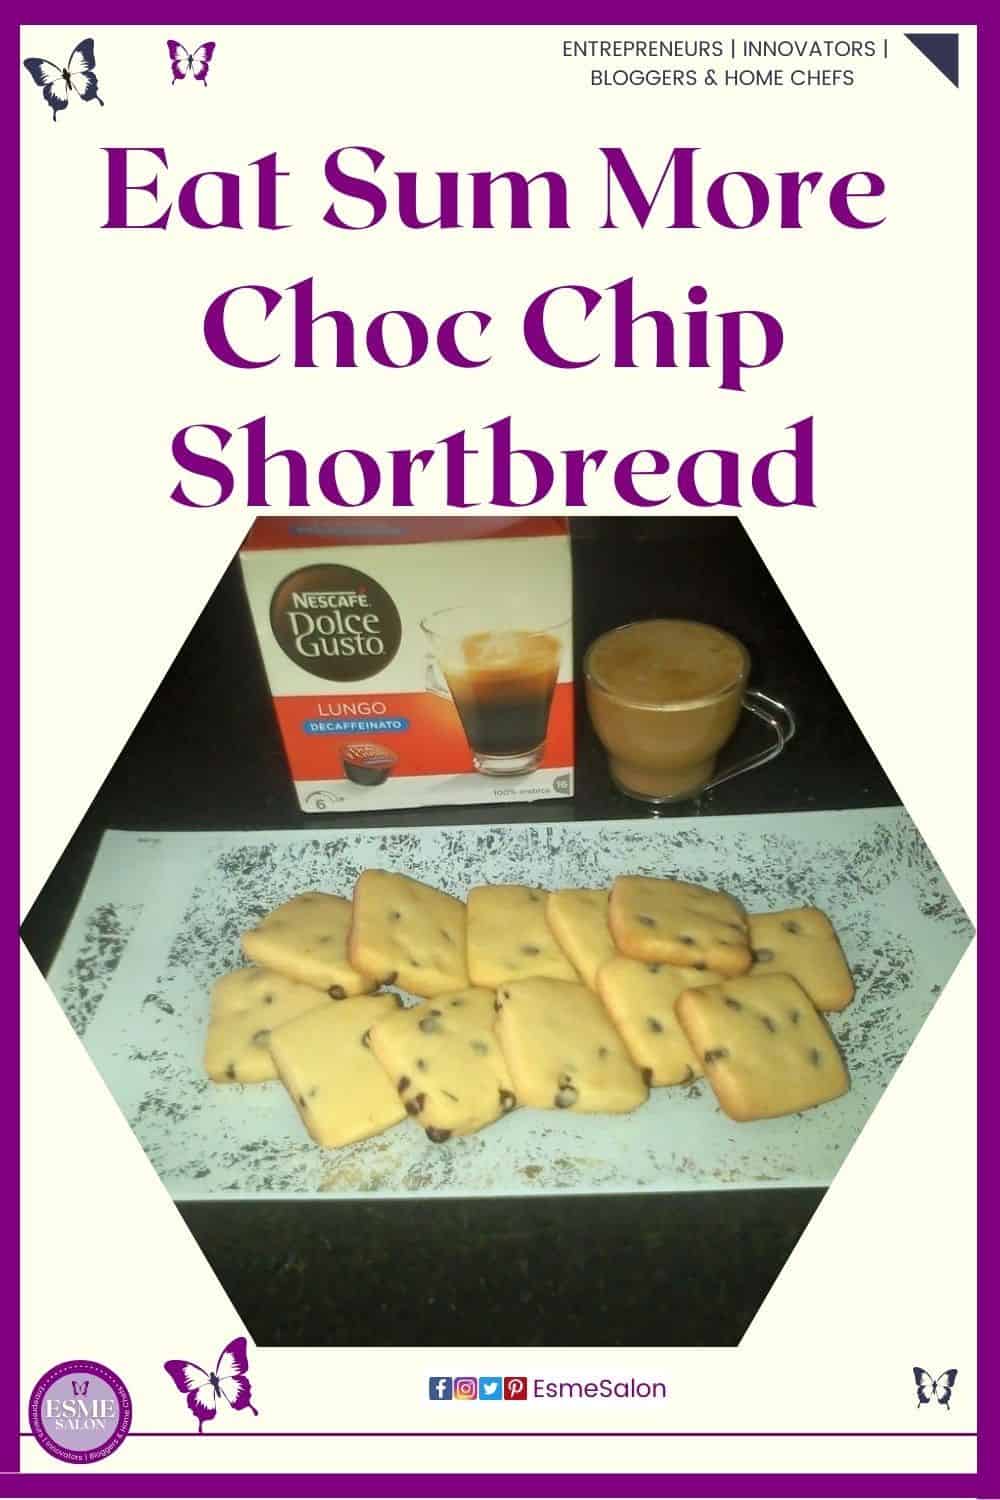 an image of a white rectangular platter with Eat Sum More Choc Chip Shortbread and a cup of coffee